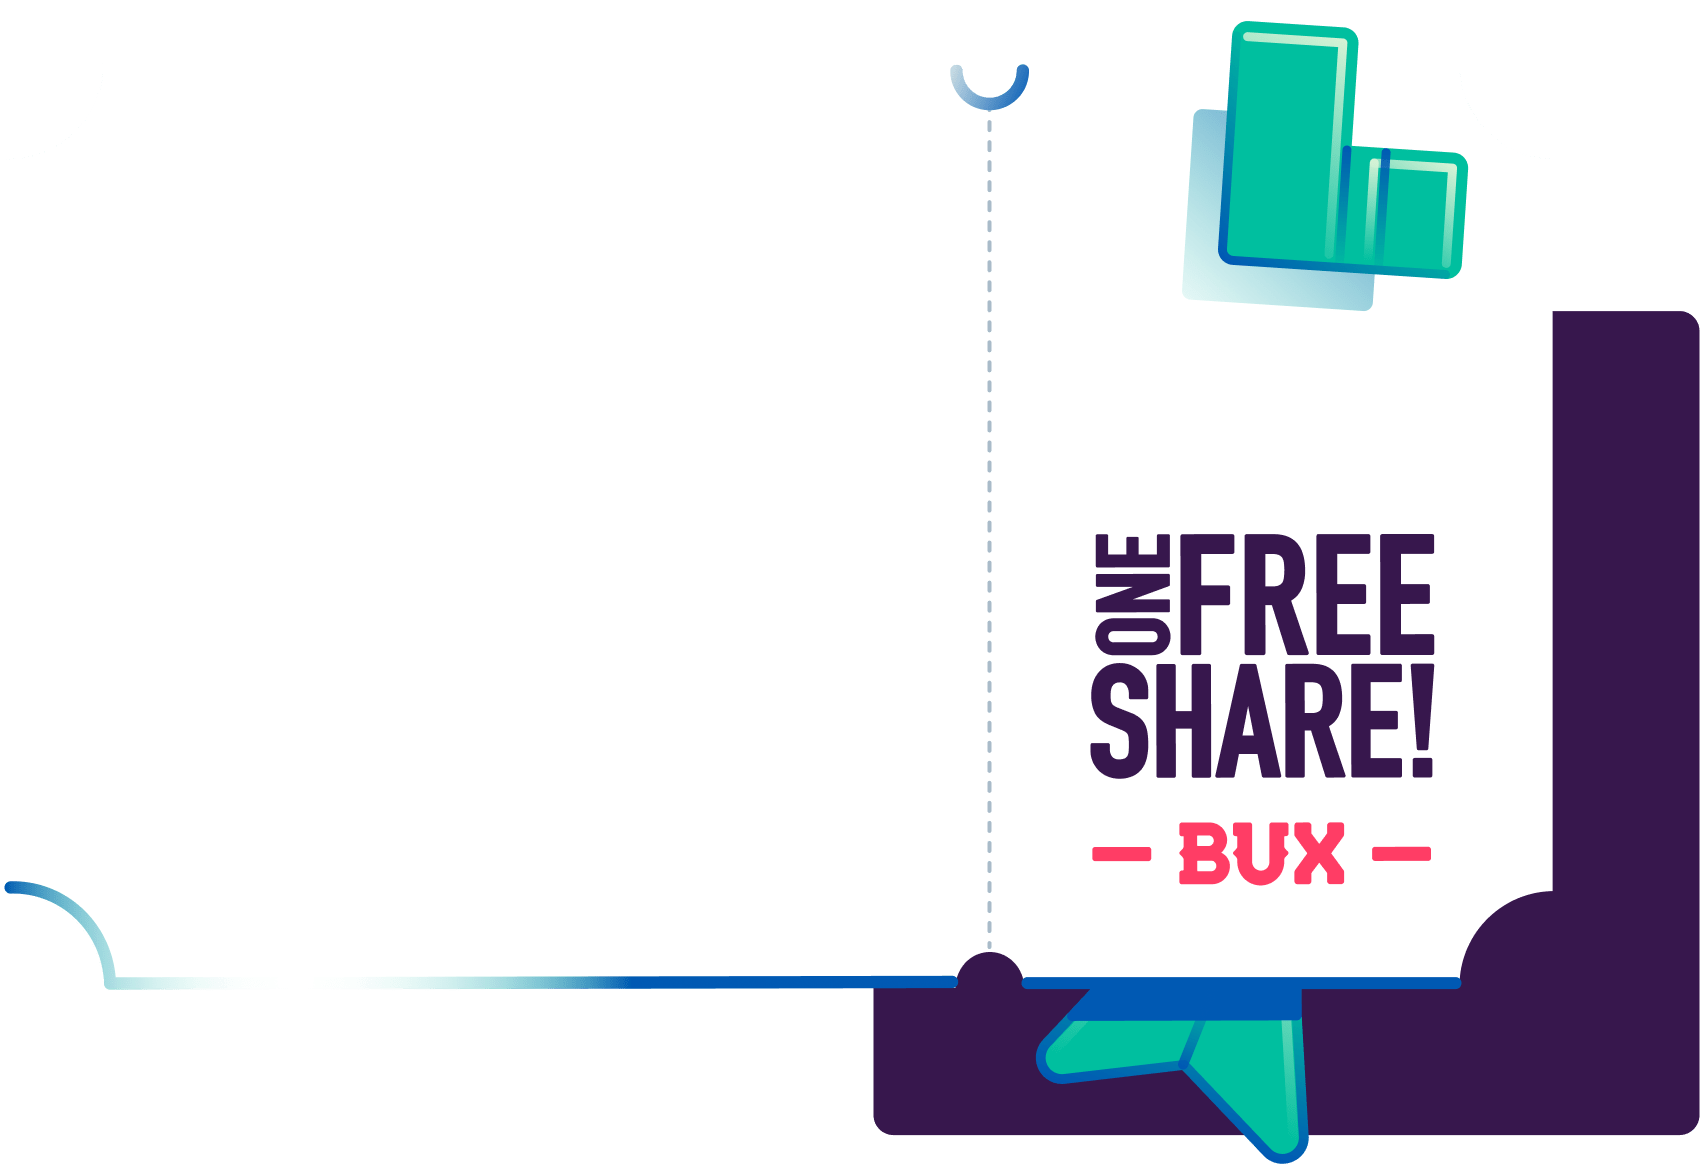 BUX Free Share